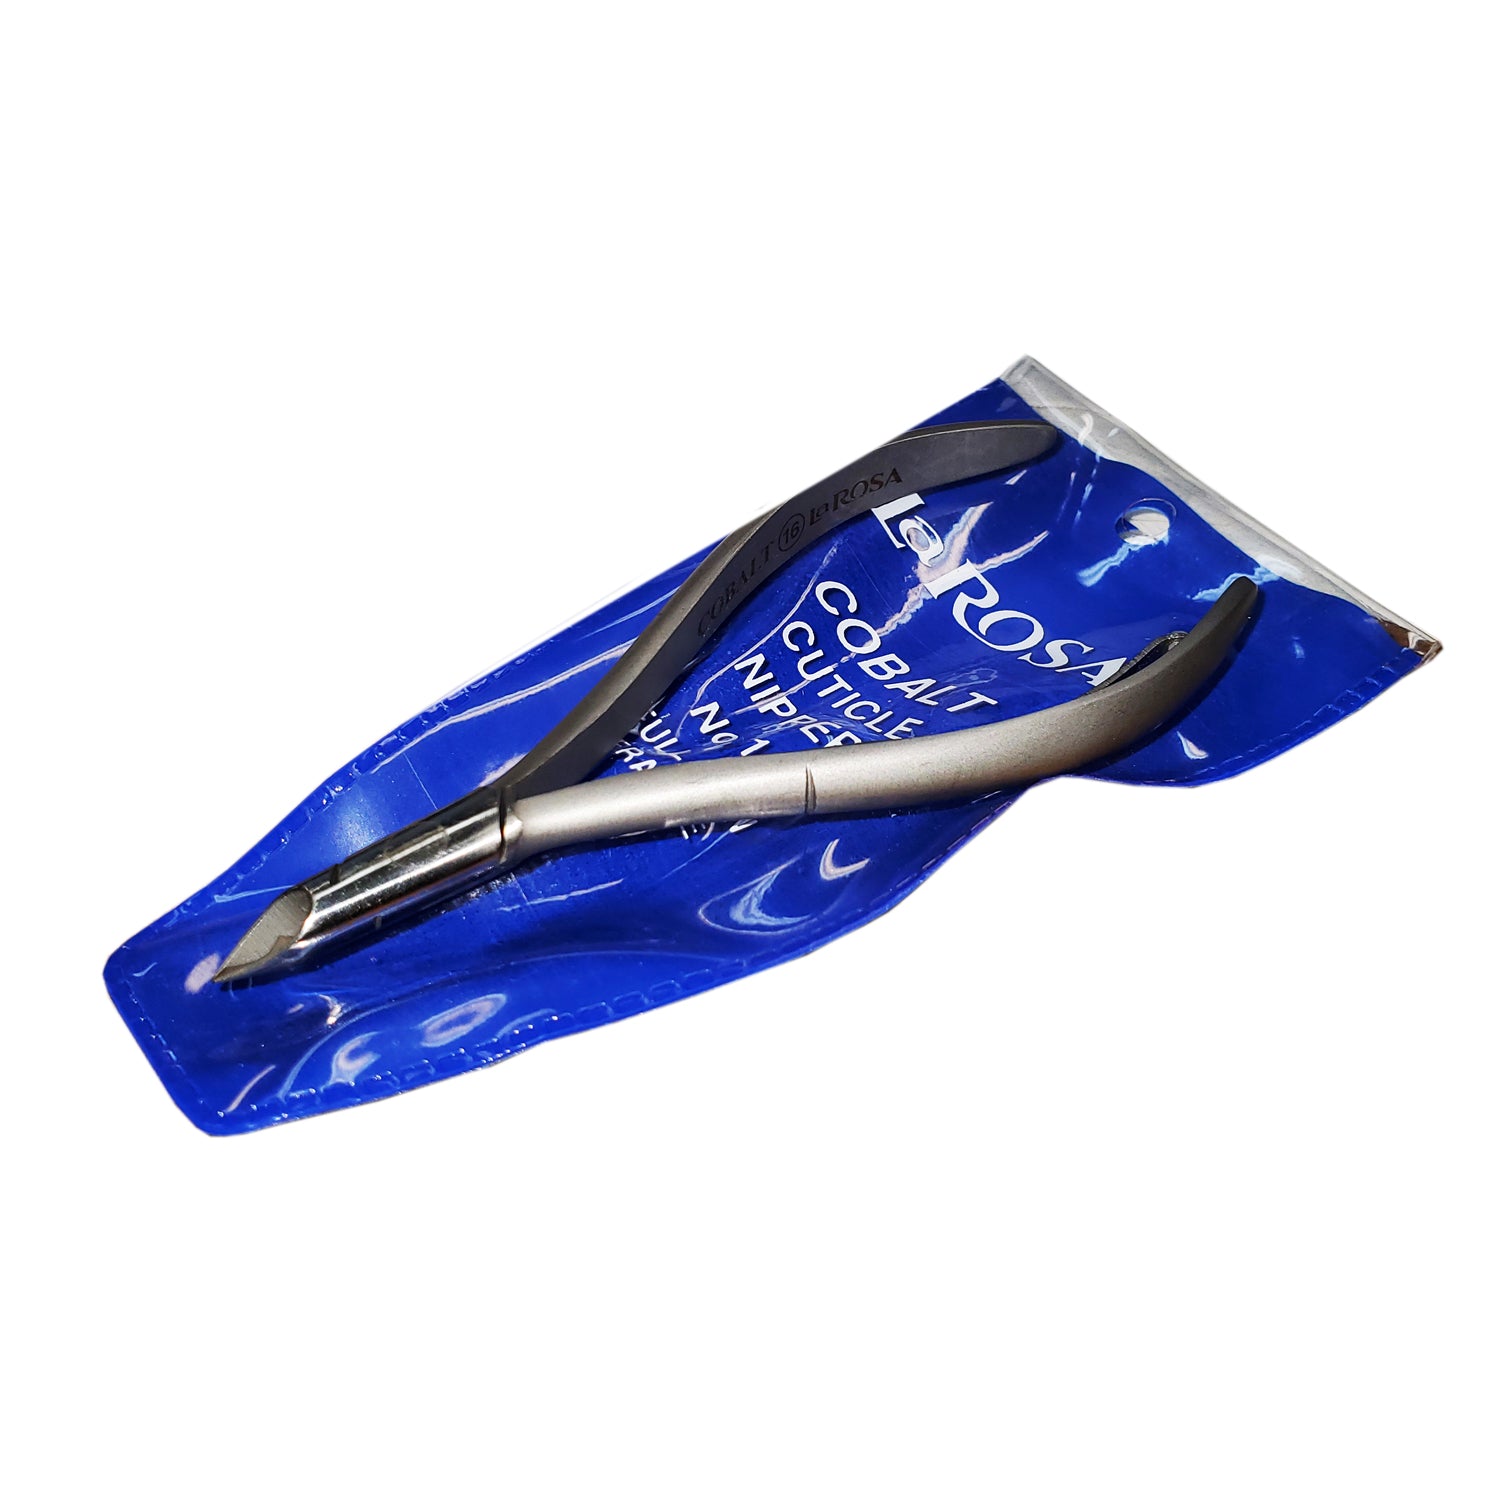 PS Star Cuticle Nippers Cobalt Pro 790P Pro.